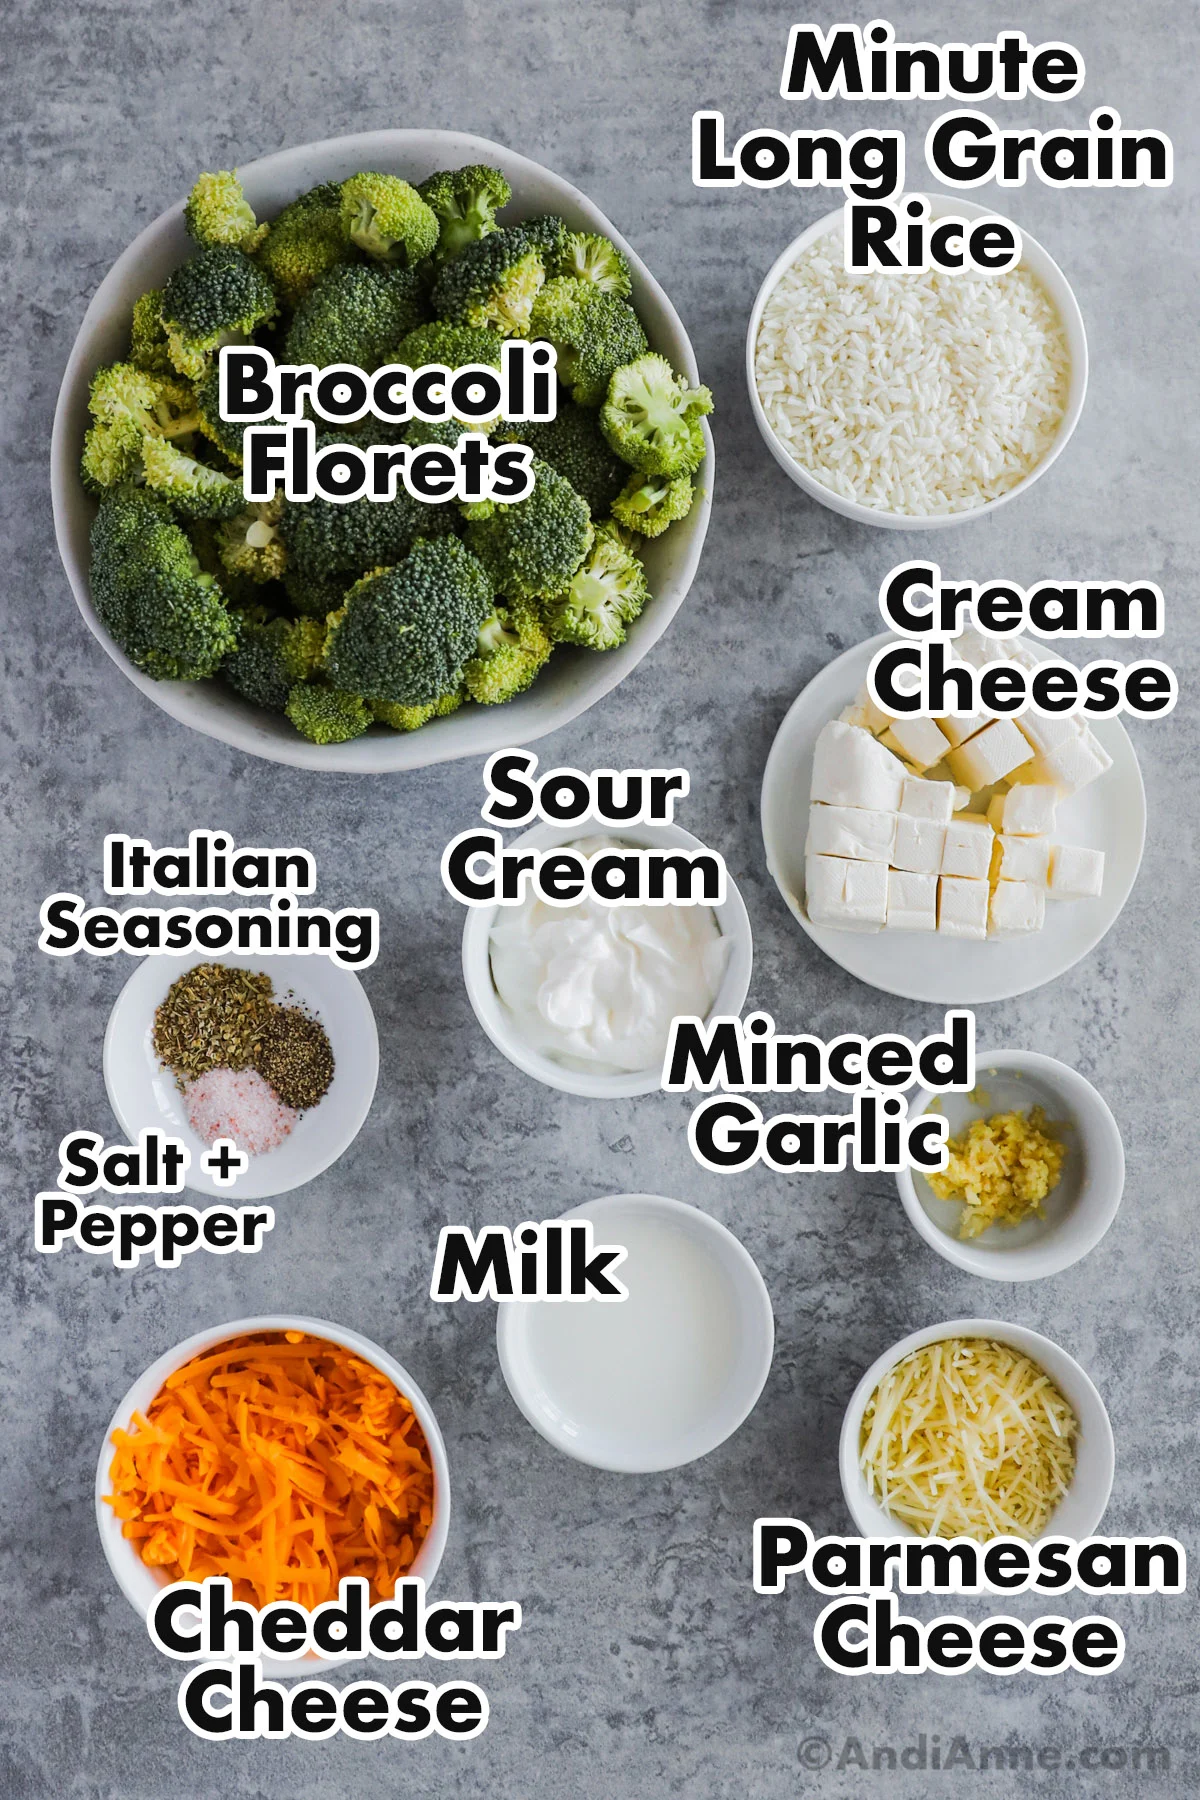 Recipe ingredients on the counter including a bowl of broccoli floret, bowls of minute rice, cubed cream cheese, sour cream, minced garlic, milk, shredded cheddar cheese, parmesan cheese and spices.